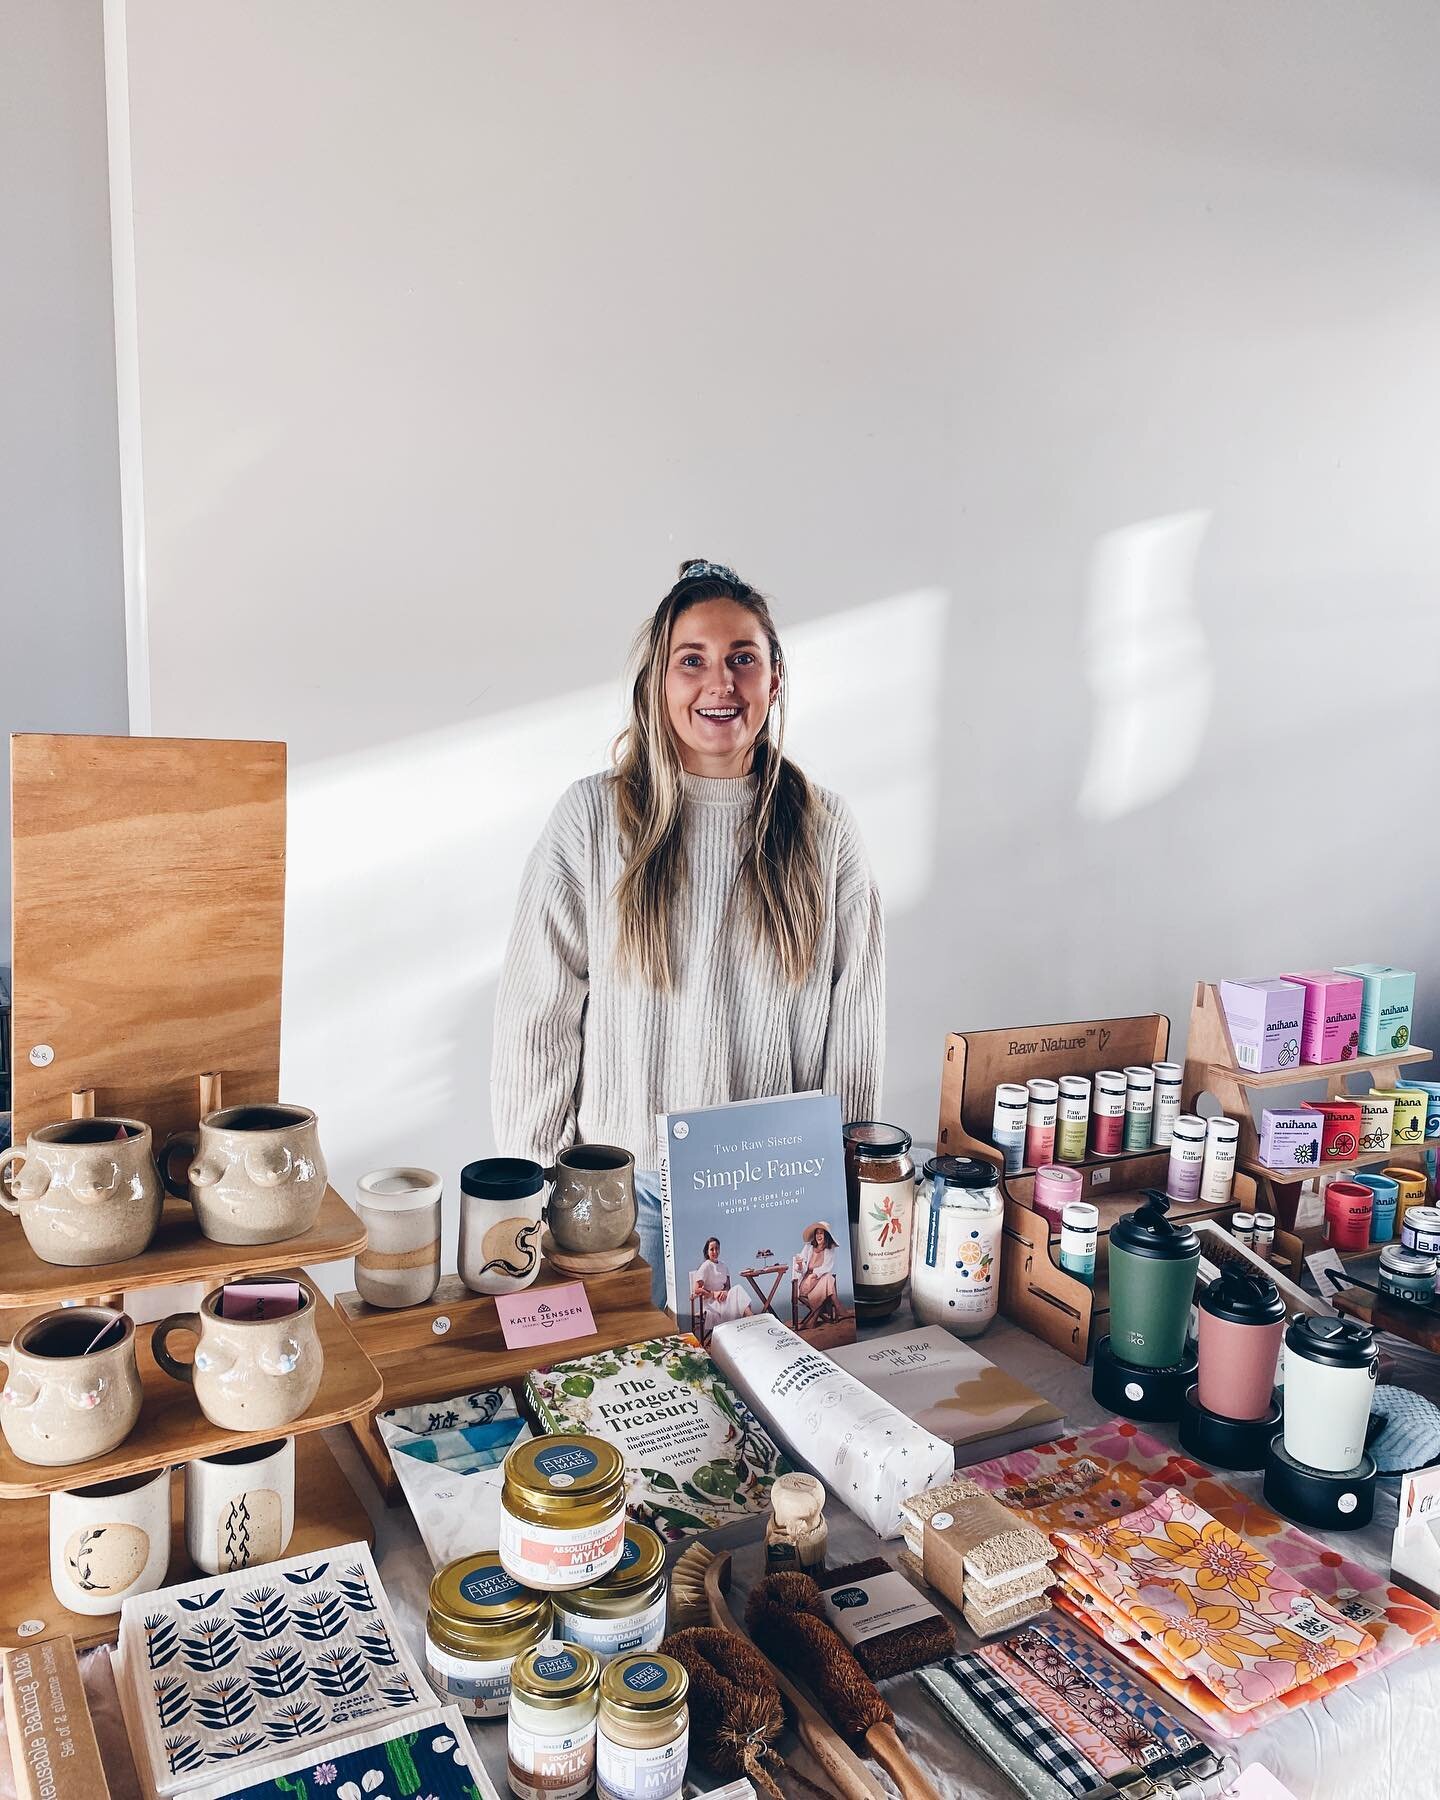 *OH HEY IT&rsquo;S ME ANNIE 👋*
-
Just out here side hustling, supporting small New Zealand &amp; Australian businesses, making sustainable living easy &amp; educating through our journal &amp; free online resources + did we mention we plant trees &a